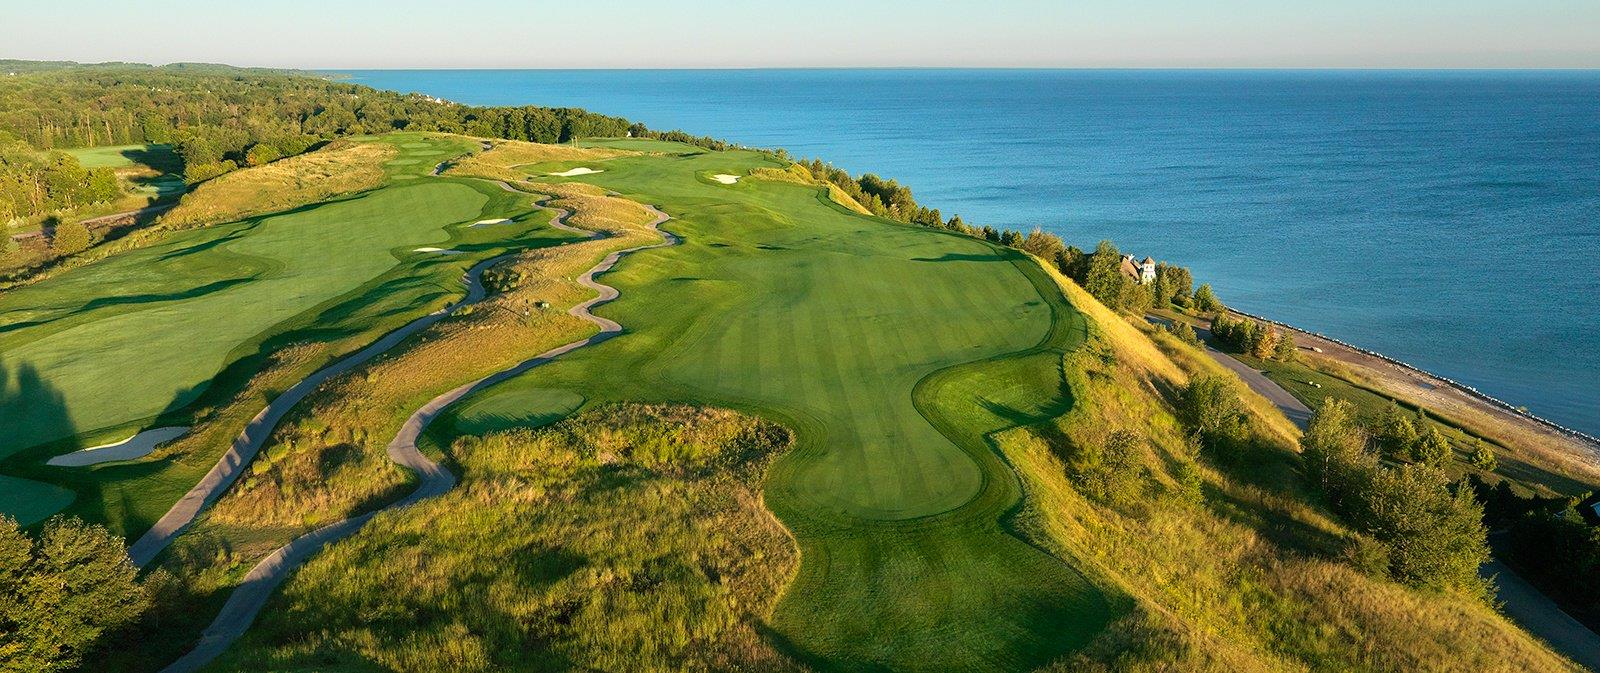 Explore The Worlds Most Picturesque Golf Courses